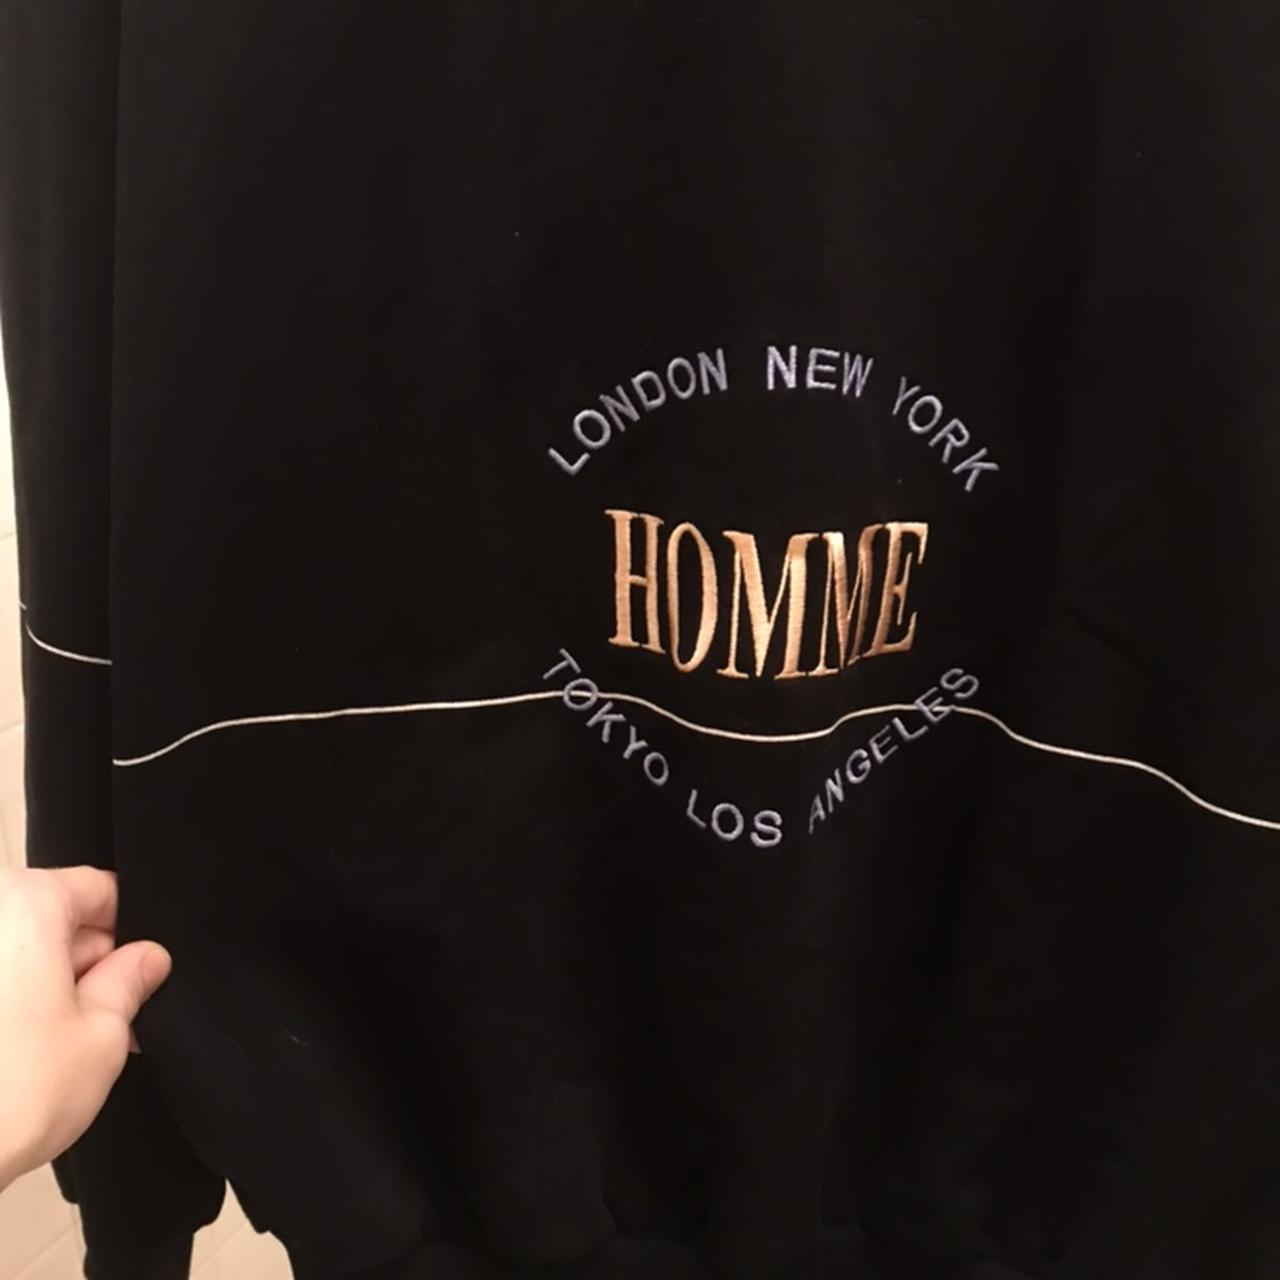 Balenciaga Homme sweater. No issues. Depop